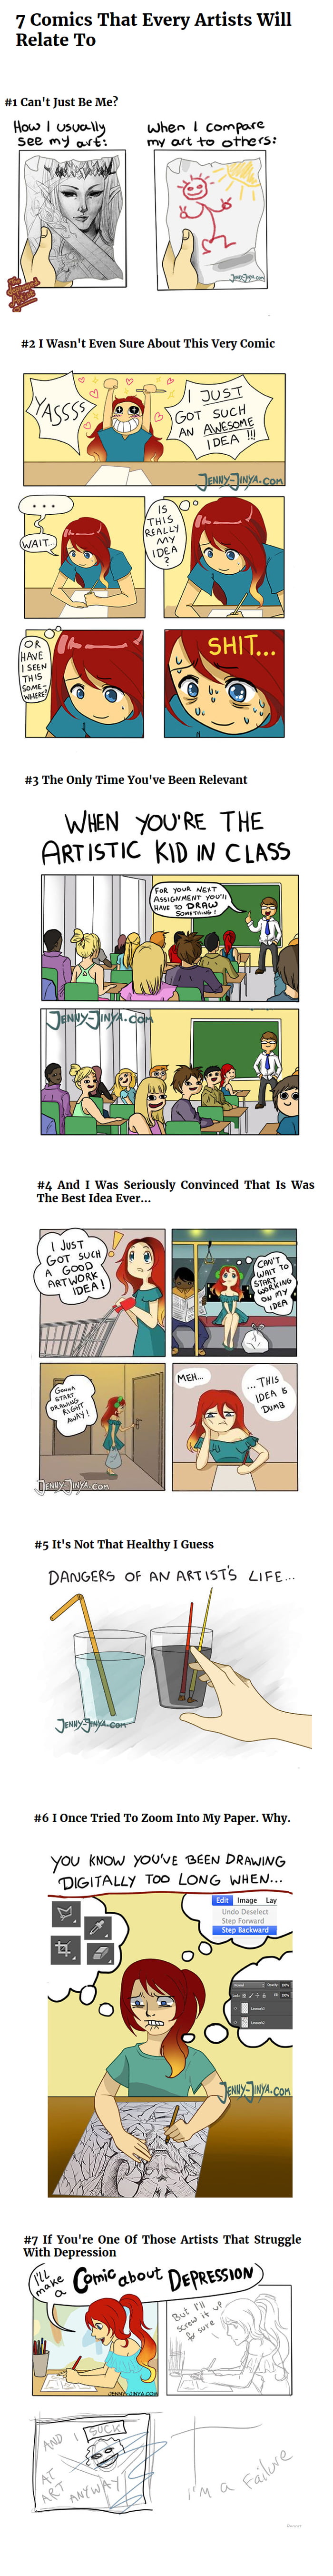 7 Comics every Artist will relate to - 9GAG